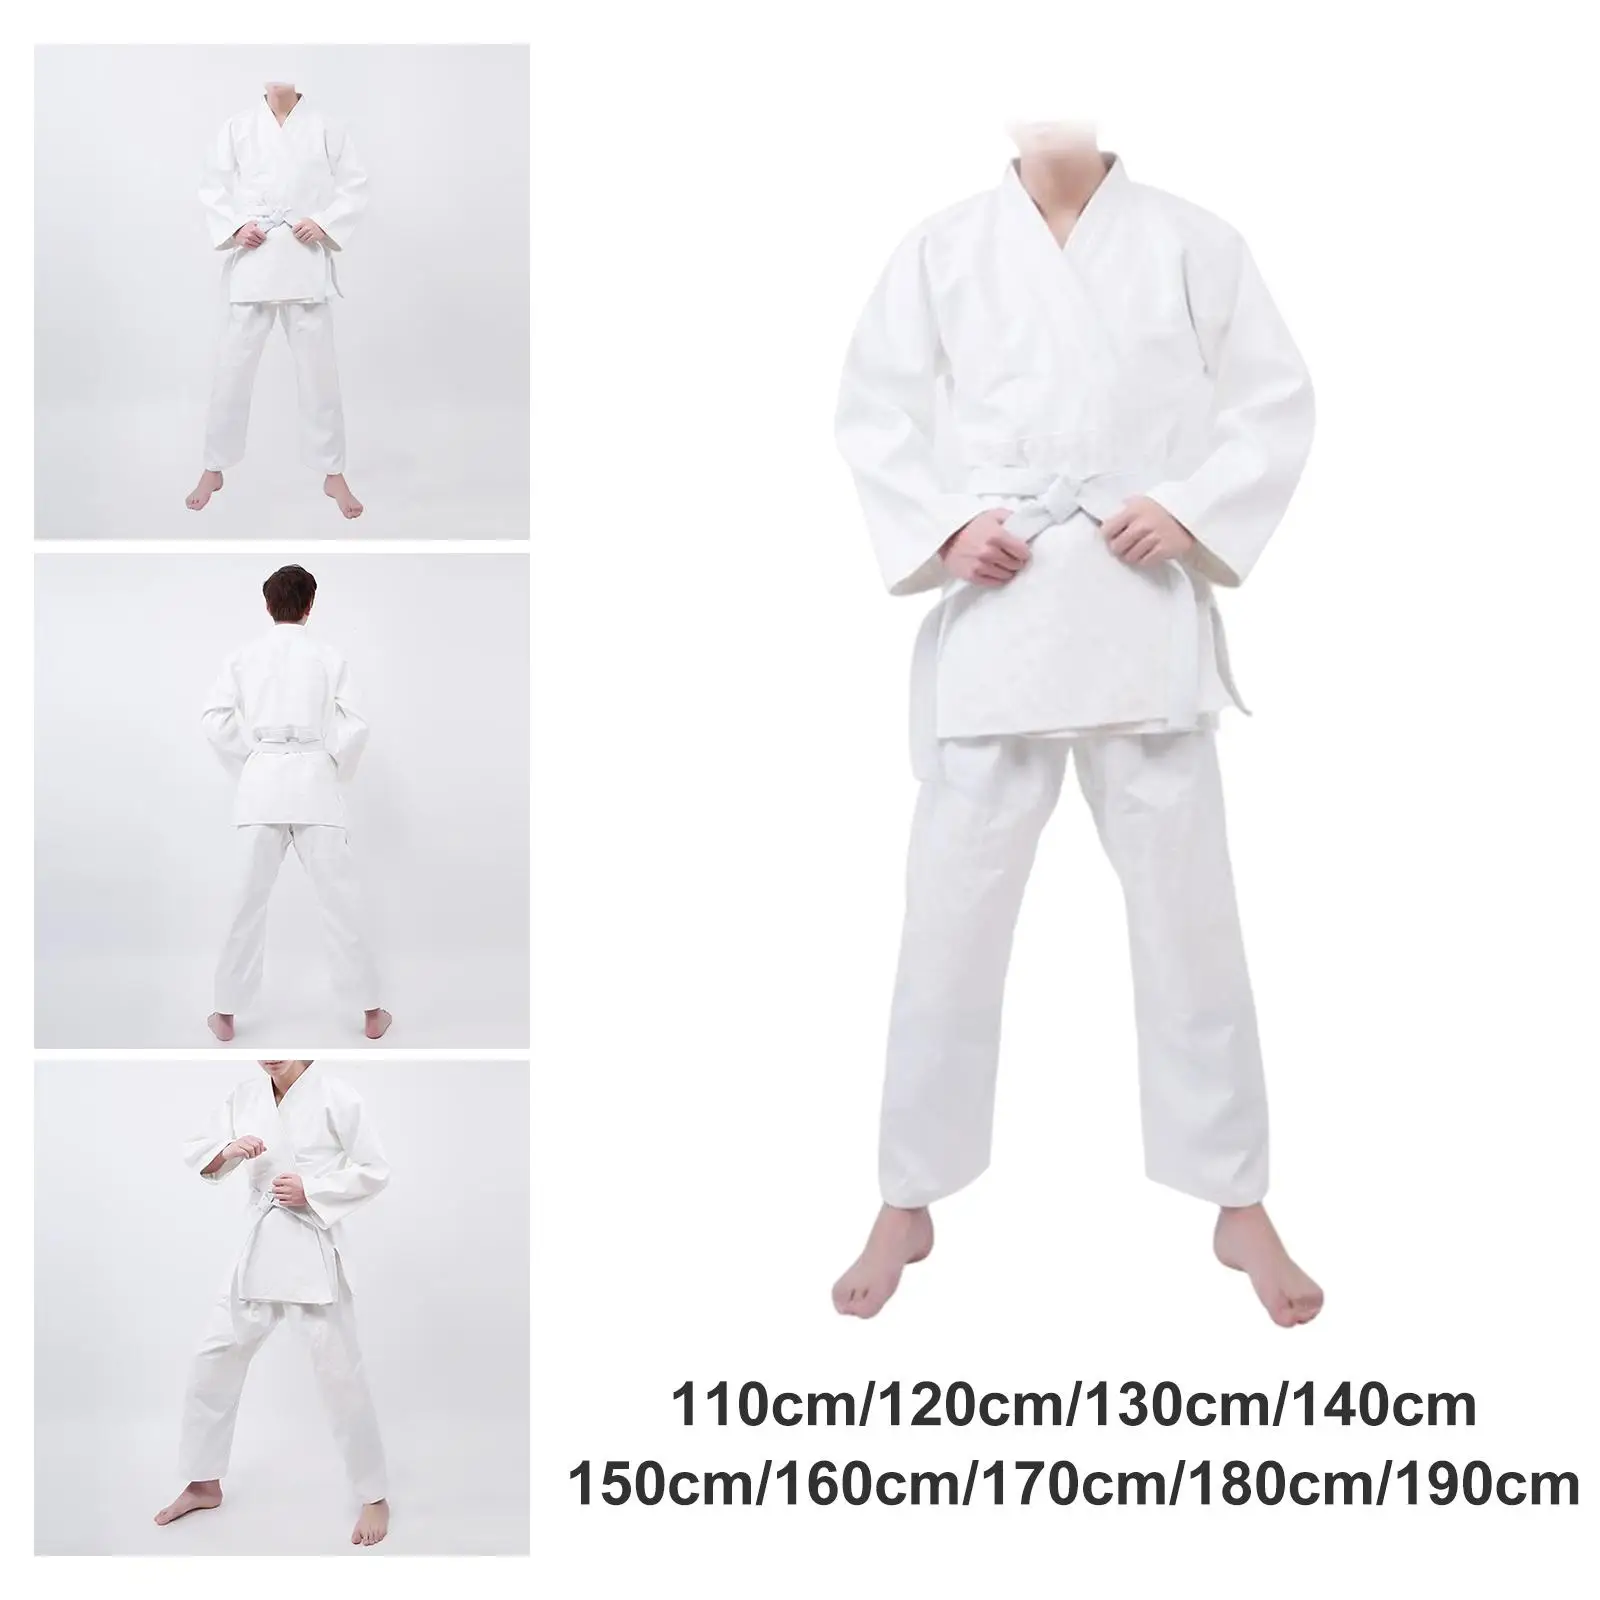 Unisex Judo Suit Costumes with Belt Stage Karate Sports Lightweight Clothes for Men Kids Adult Youth Fitness Training